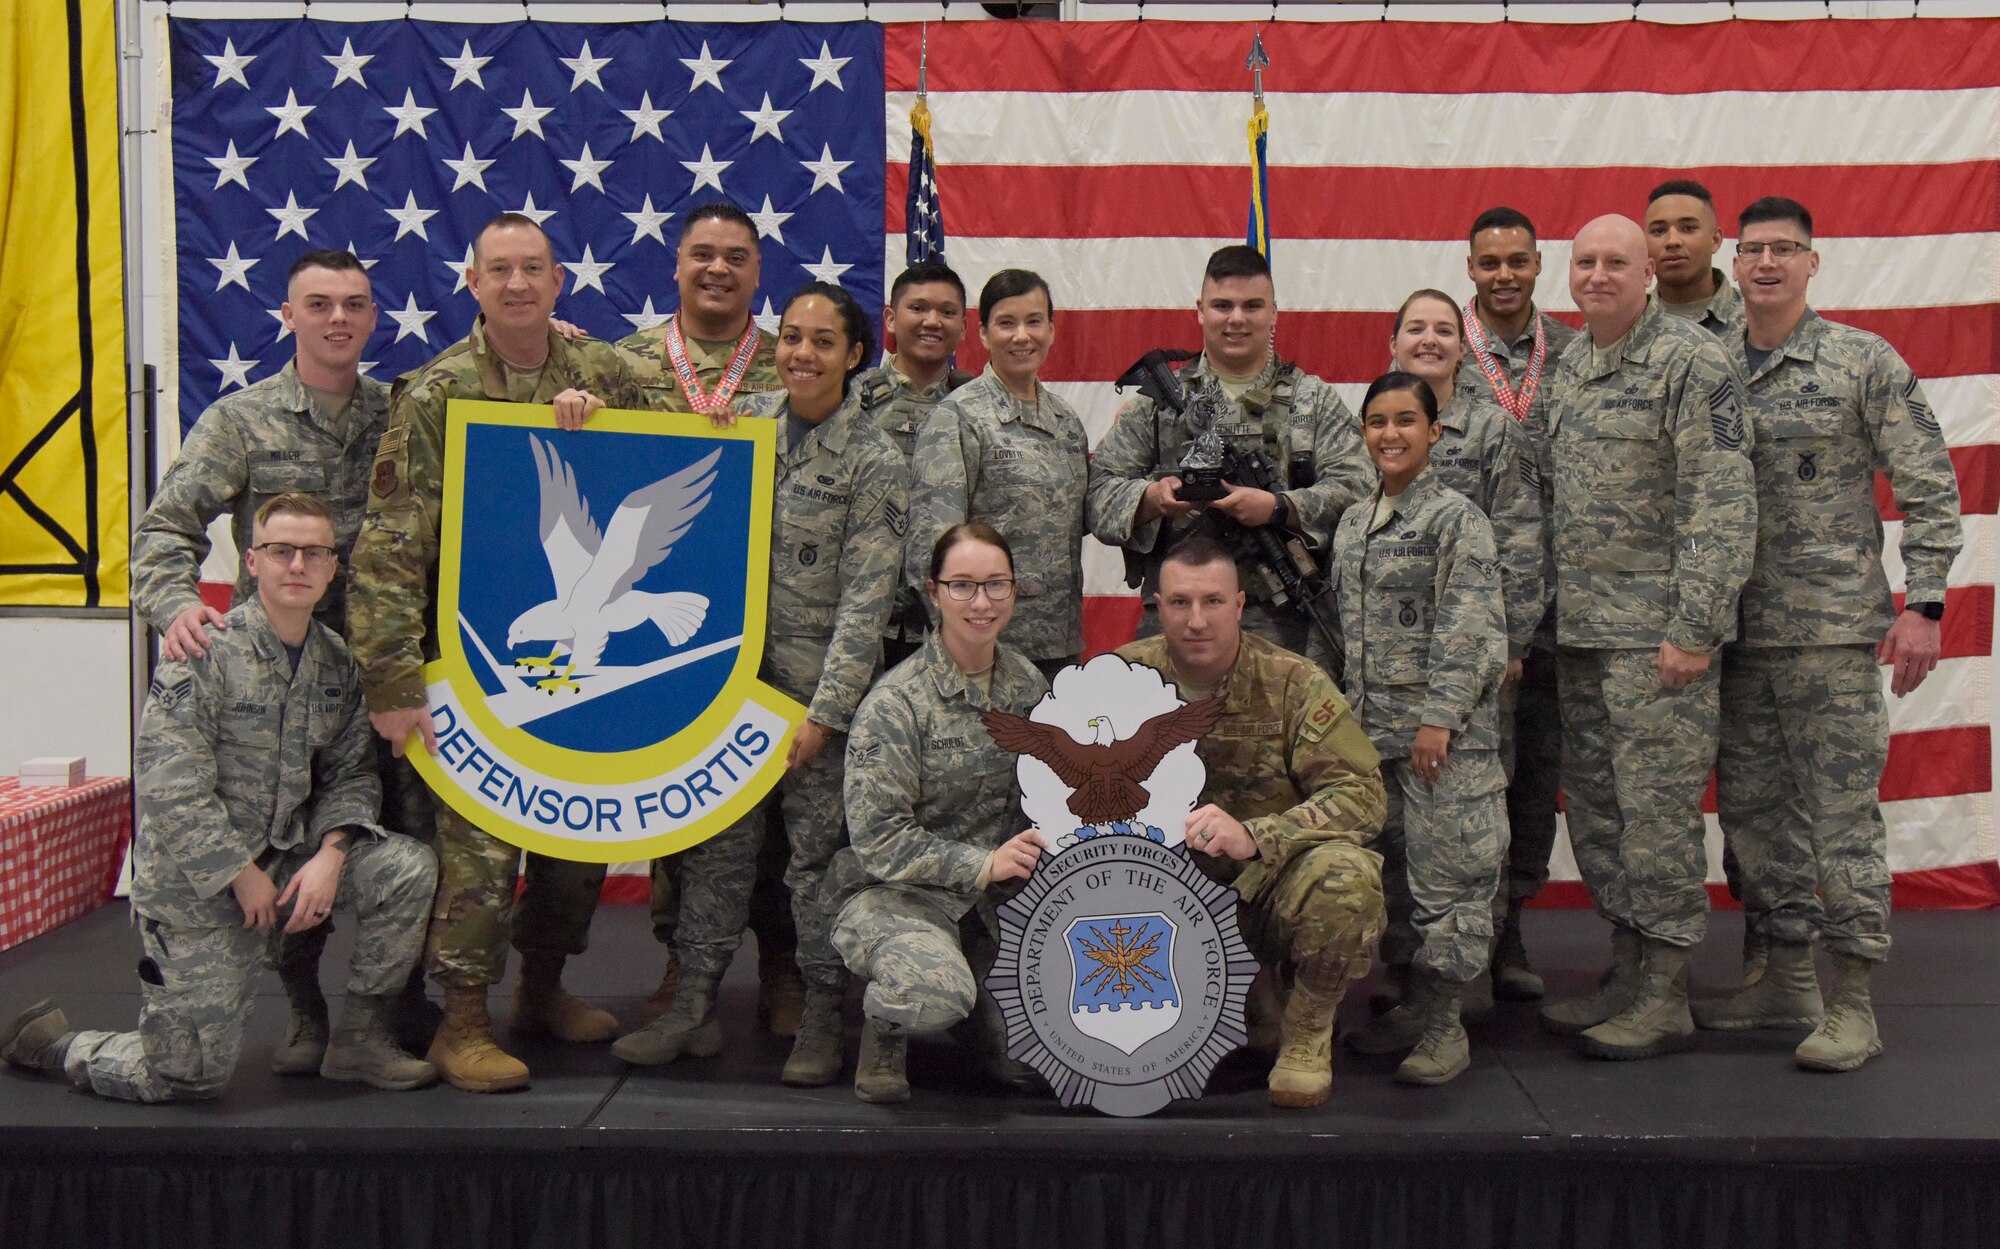 U.S. Air Force Col. Debra Lovette, 81st Training Wing commander, and Chief Master Sgt. David Pizzuto, 81st TRW command chief, present members of the 81st Security Forces Squadron S3 Operations with the Team of the Year award during the 81st Training Wing's 2018 Annual Awards Ceremony inside a hangar at Keesler Air Force Base, Mississippi, Feb. 1, 2019. During the ceremony, base leadership recognized outstanding Airmen and civilians from across the installation for their accomplishments throughout 2018. (U.S. Air Force photo by Kemberly Groue)